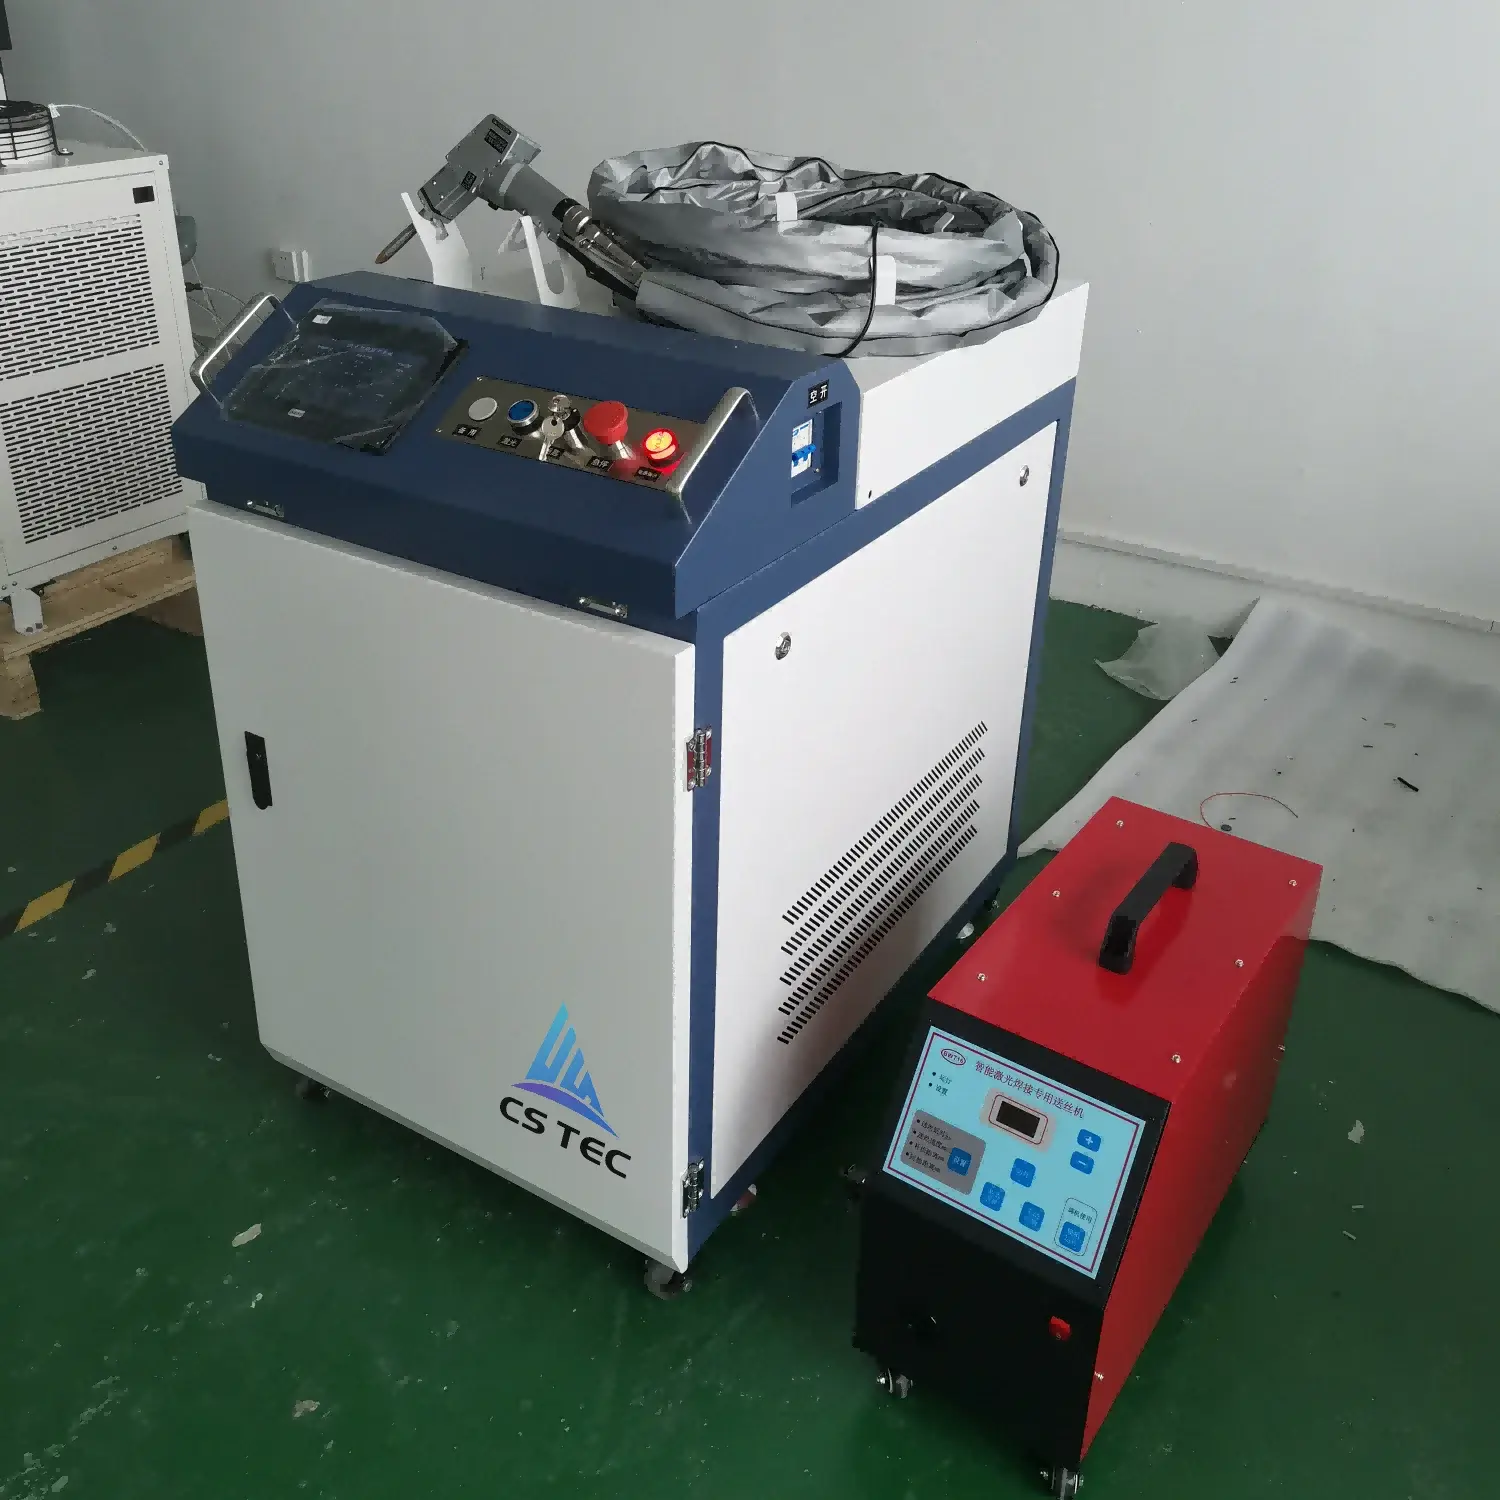 RayTools 6 Axis Robot Laser Welding Machine 1KW to 20KW Robotics Kit with Max Laser Source New Used Options Reliable Motor